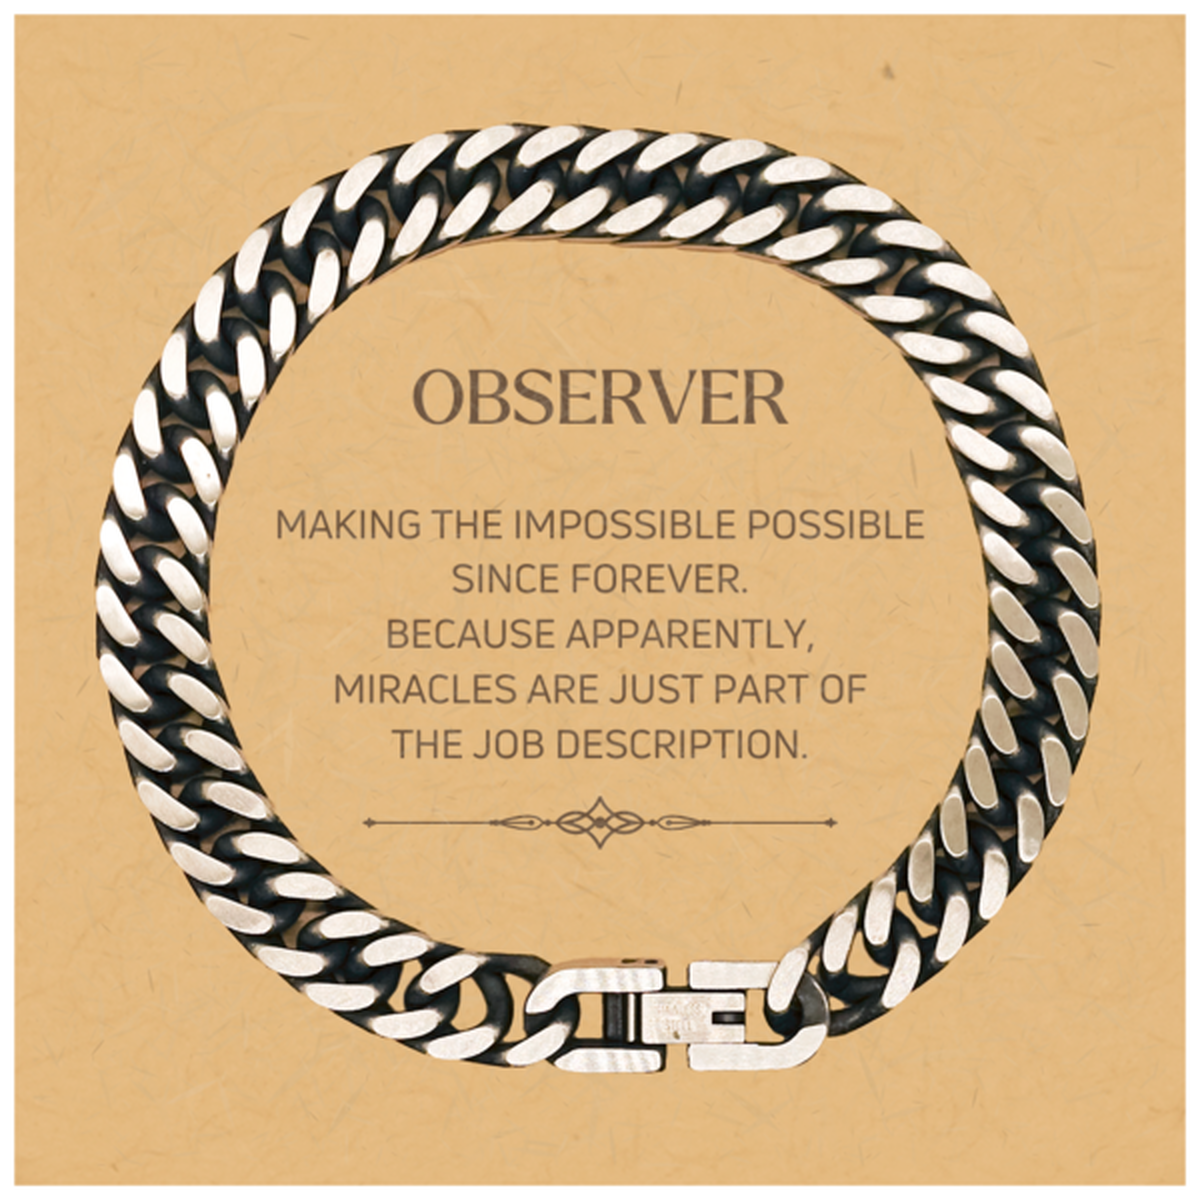 Funny Observer Gifts, Miracles are just part of the job description, Inspirational Birthday Christmas Cuban Link Chain Bracelet For Observer, Men, Women, Coworkers, Friends, Boss